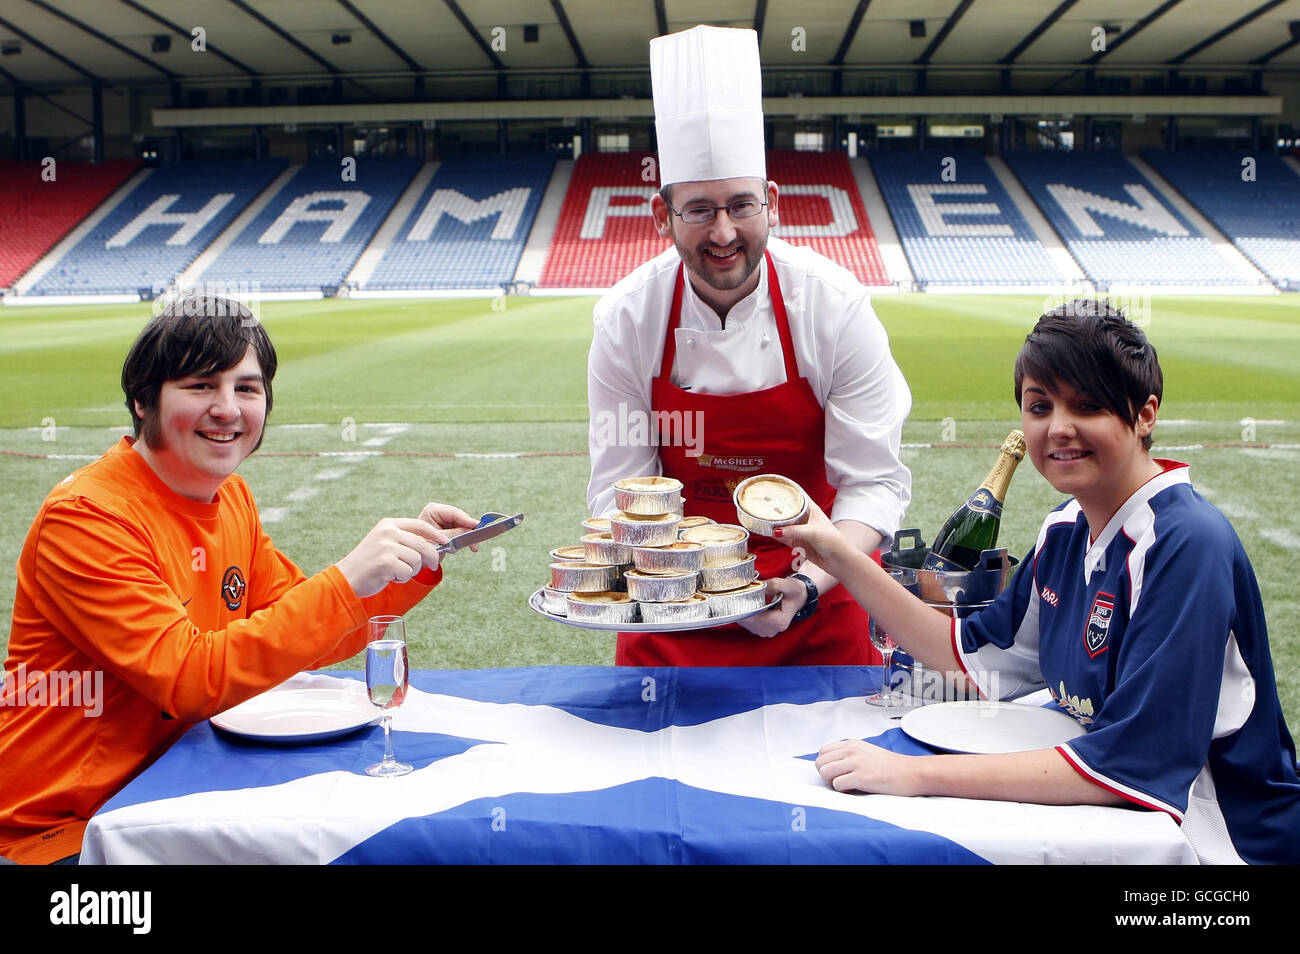 Ross County fan Leanne Bonner (right), Dundee United fan Jamie Kidd (left) and chef Glen Yorke with the new 40% reduced fat Scotch Pie at Hampden in Glasgow to be sold at the Scottish FA Cup final on Saturday. Stock Photo